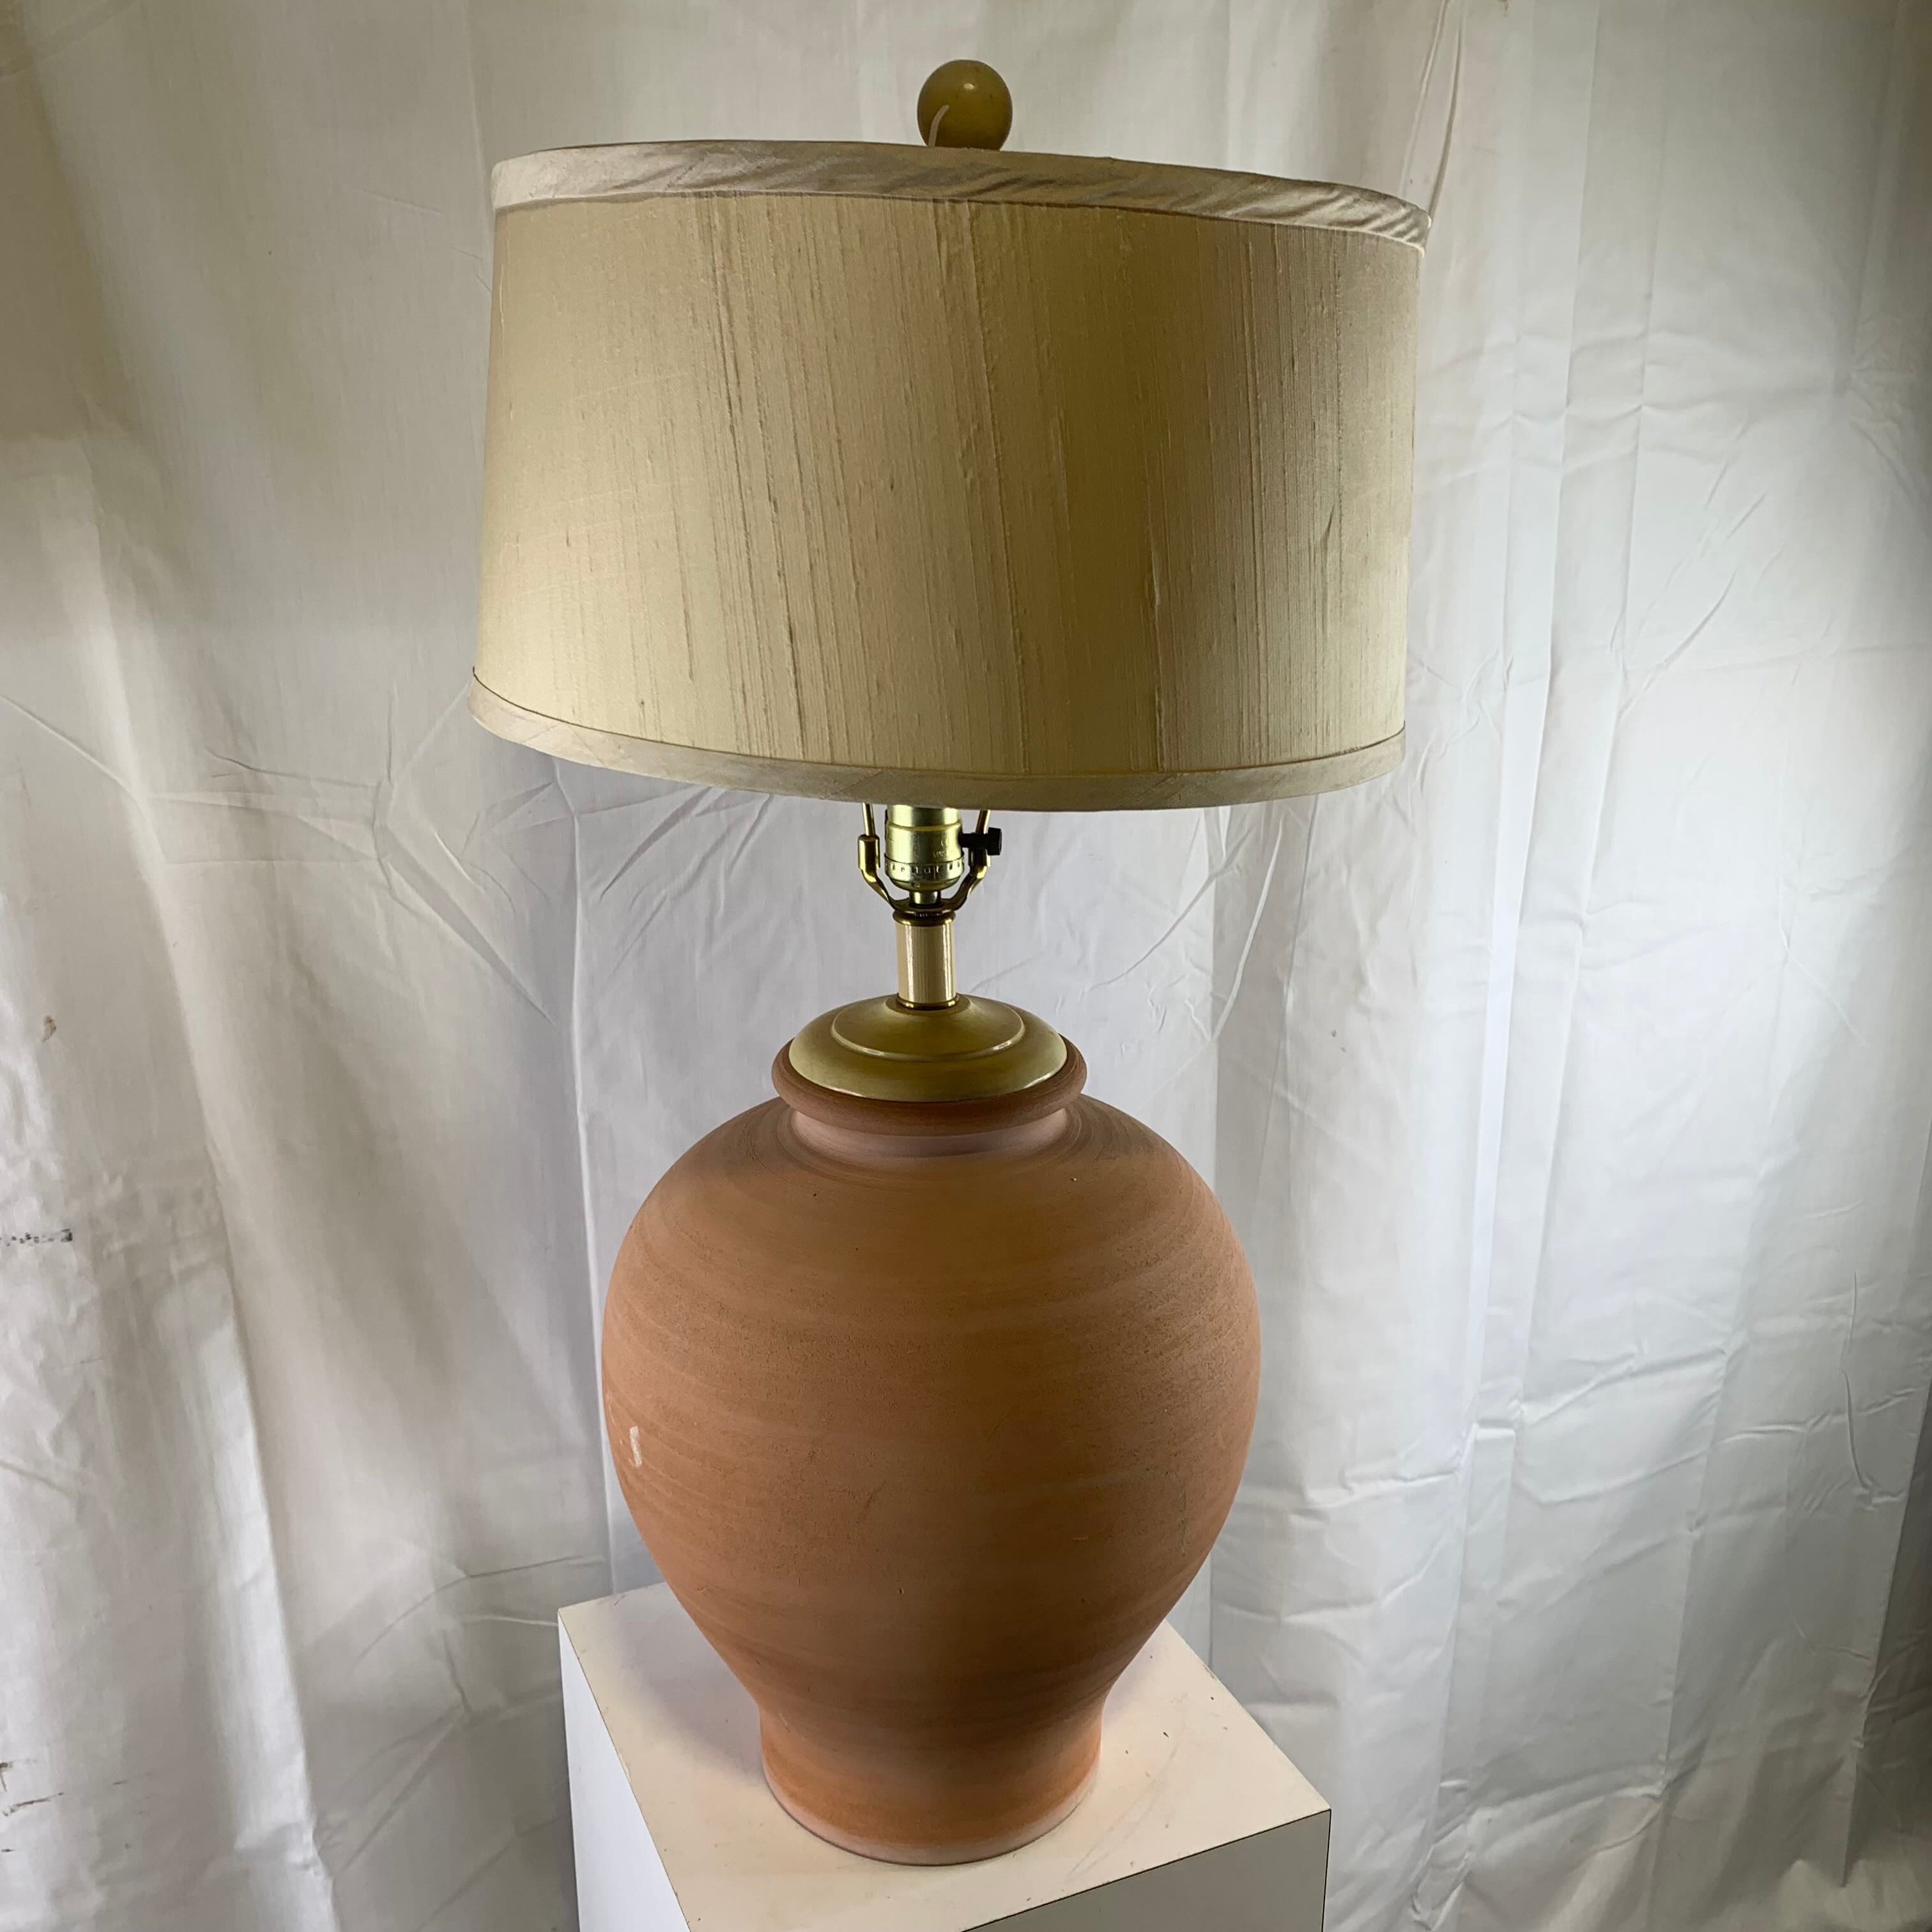 14" Diameter x 31" Pink Pottery with Shade Table Lamp